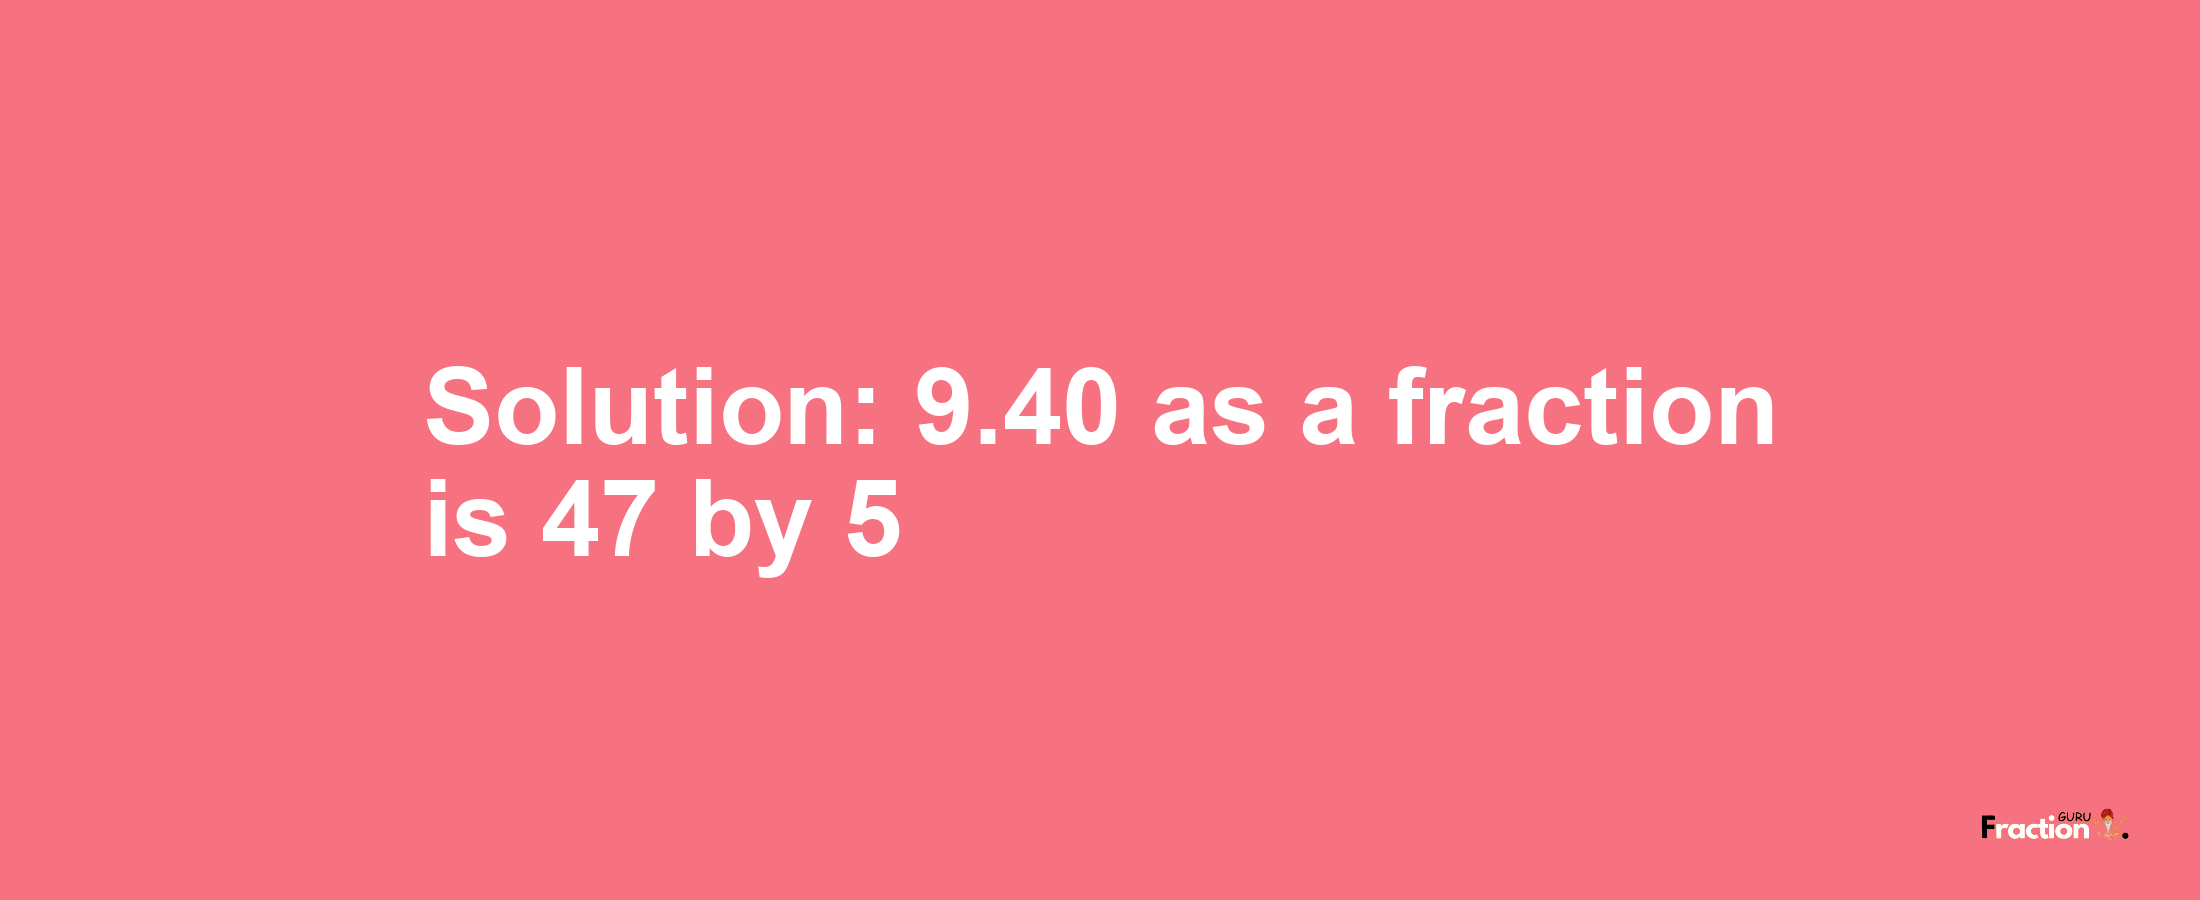 Solution:9.40 as a fraction is 47/5